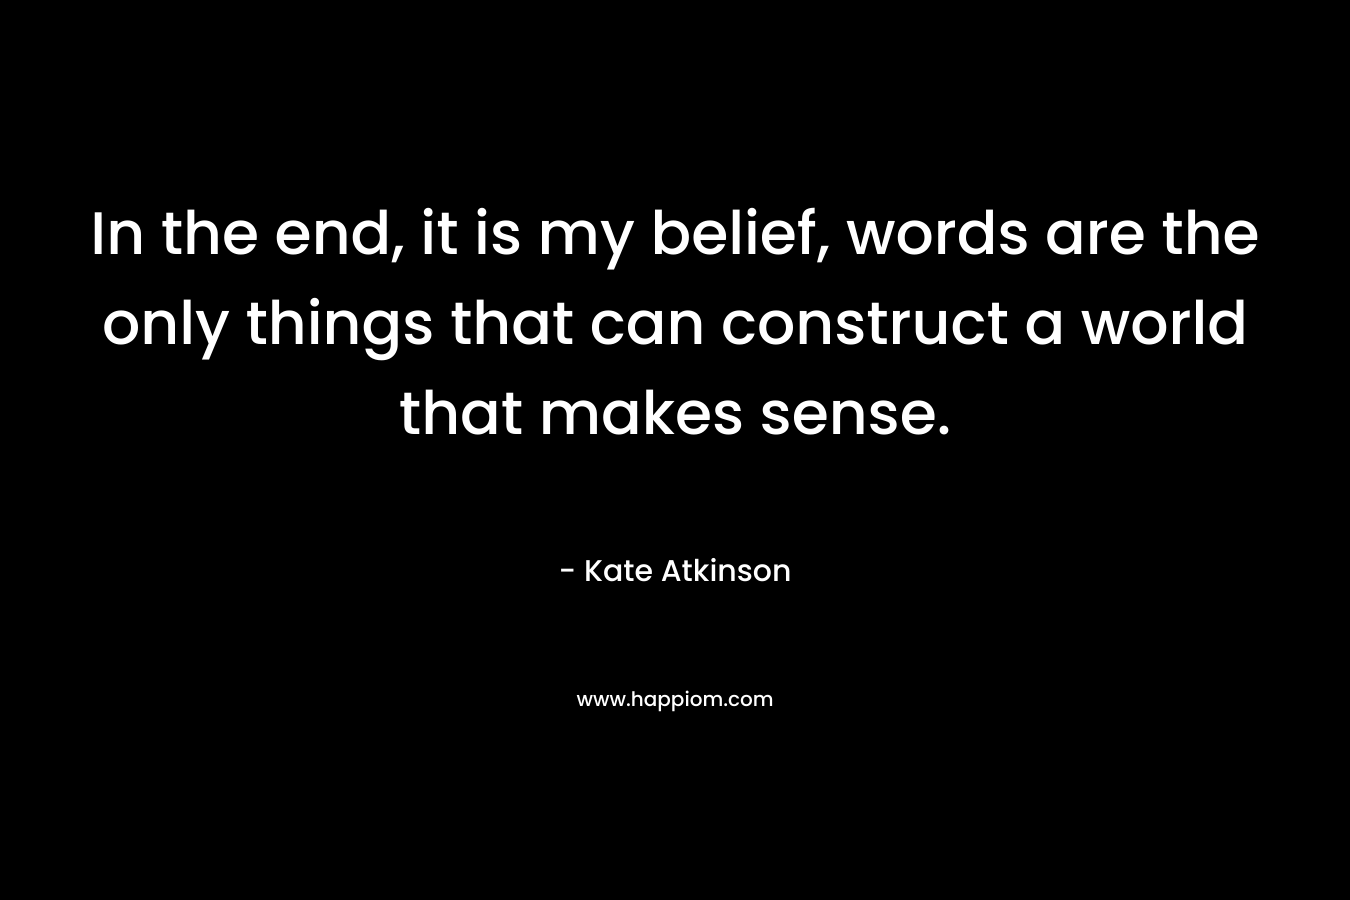 In the end, it is my belief, words are the only things that can construct a world that makes sense. – Kate Atkinson